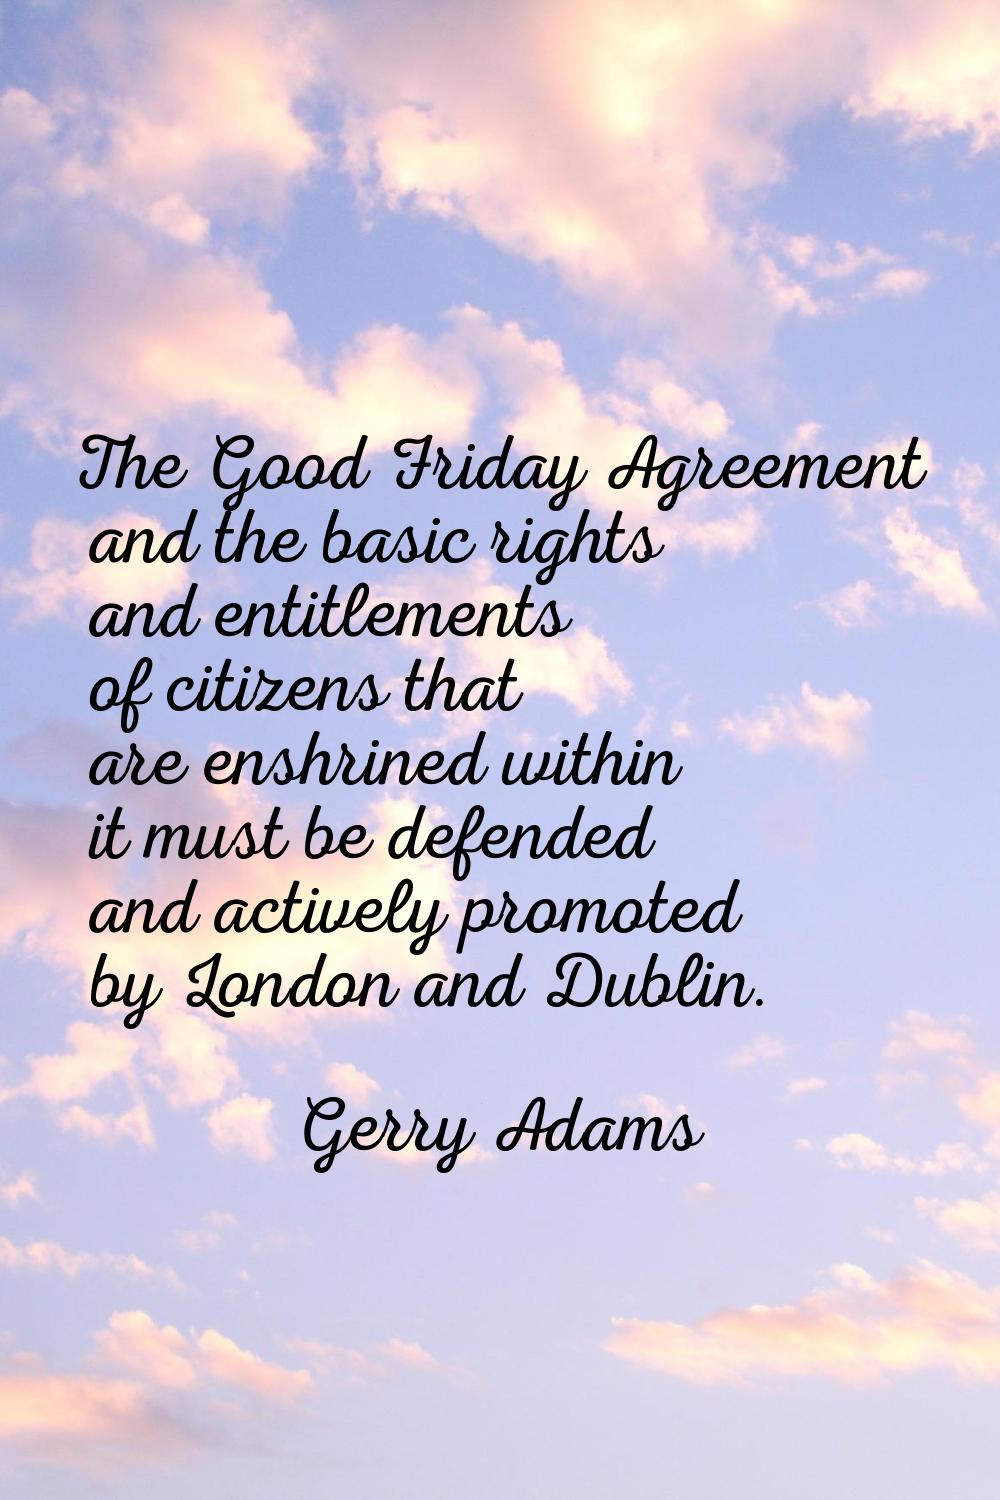 The Good Friday Agreement and the basic rights and entitlements of citizens that are enshrined with